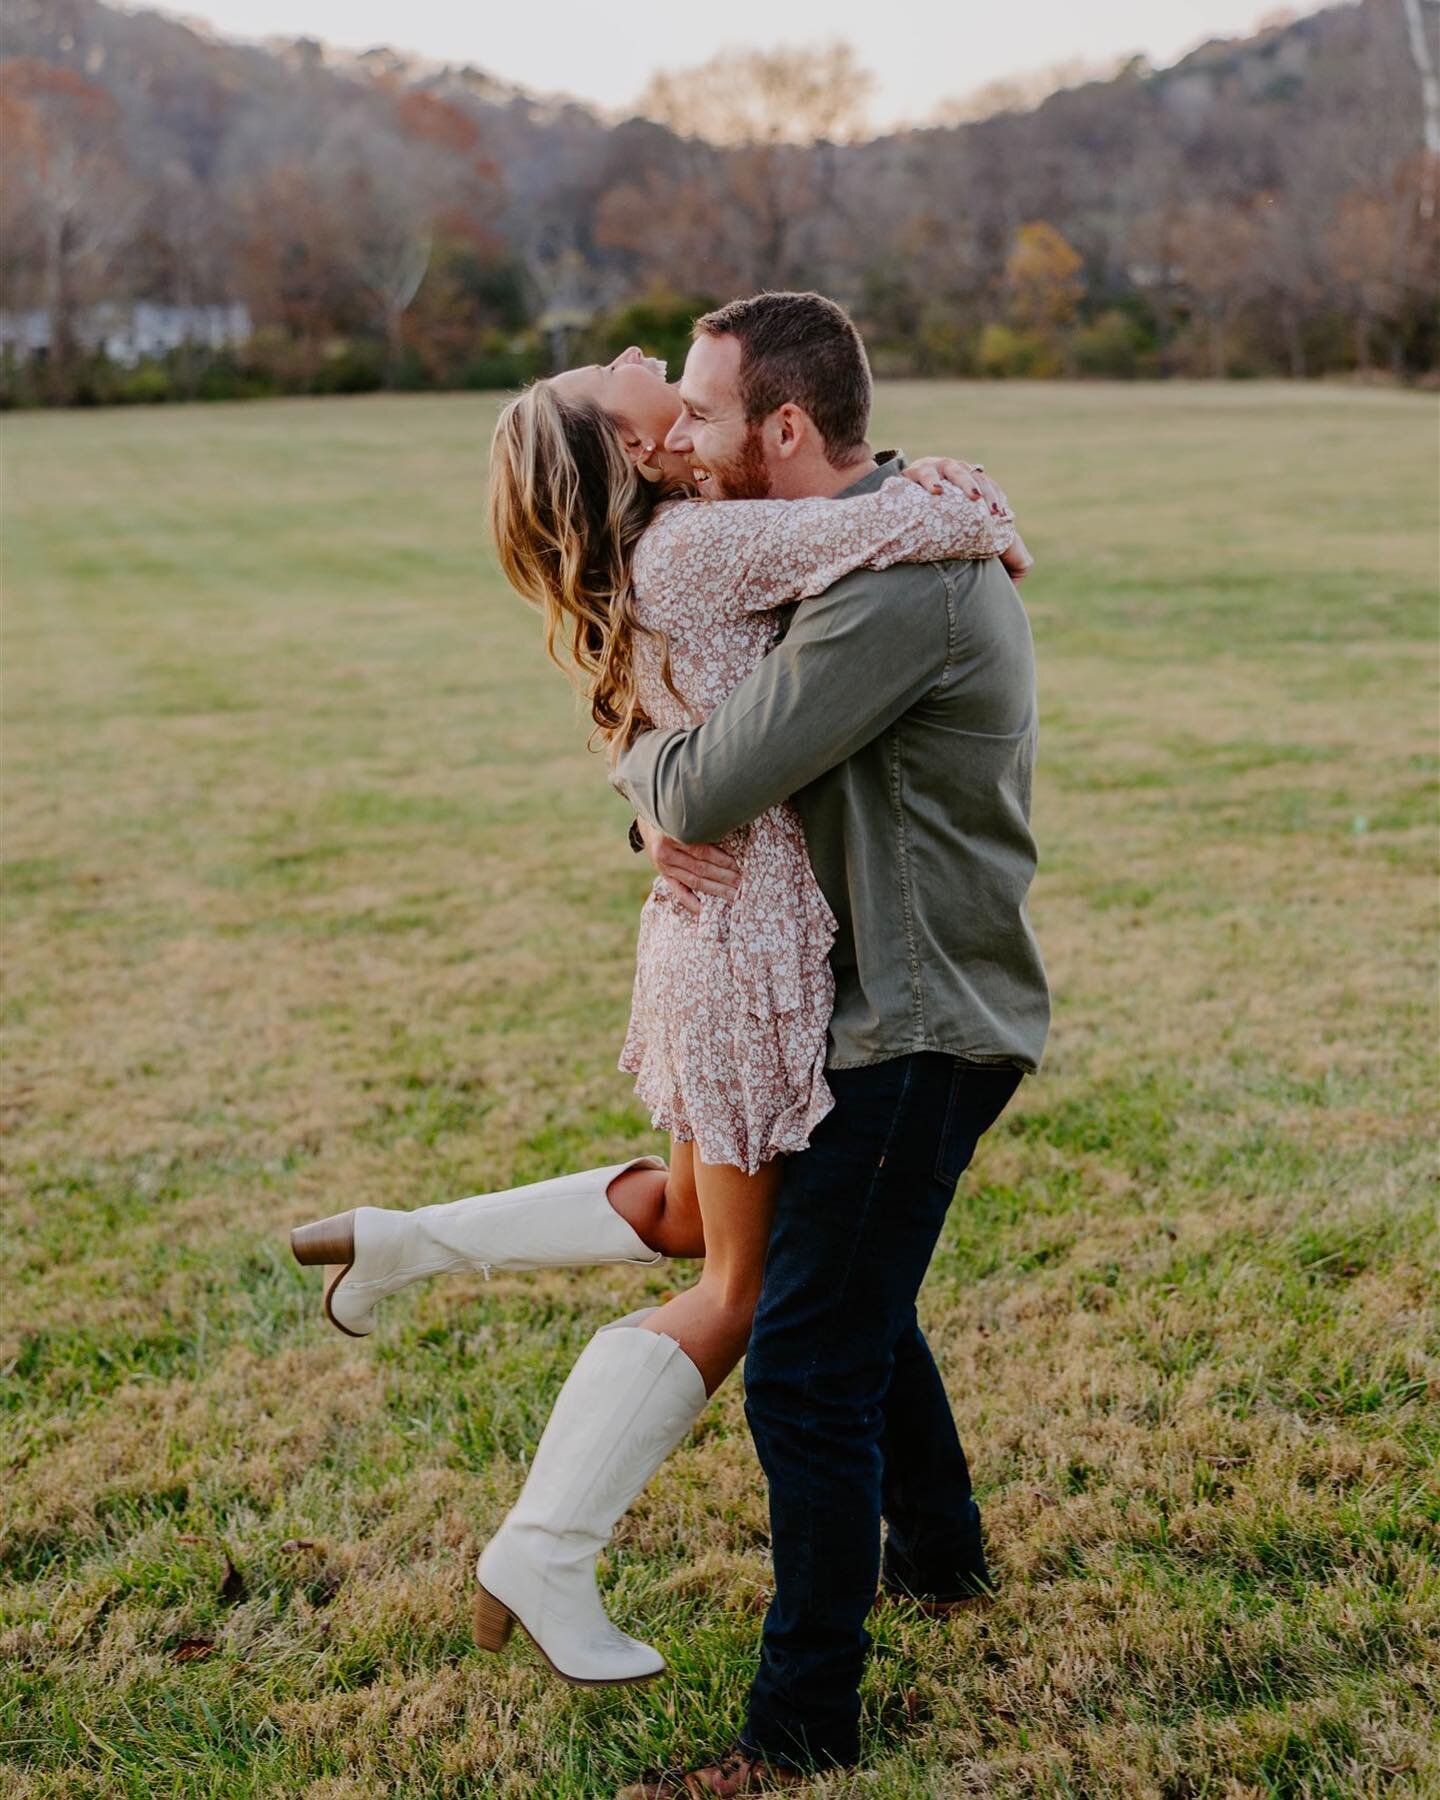 *sprints to get white boots after this engagement session* How cool are Morgan and Danny?!

#nashvilleengagementphotographer #nashvilleengagementsession #nashvillephotographer